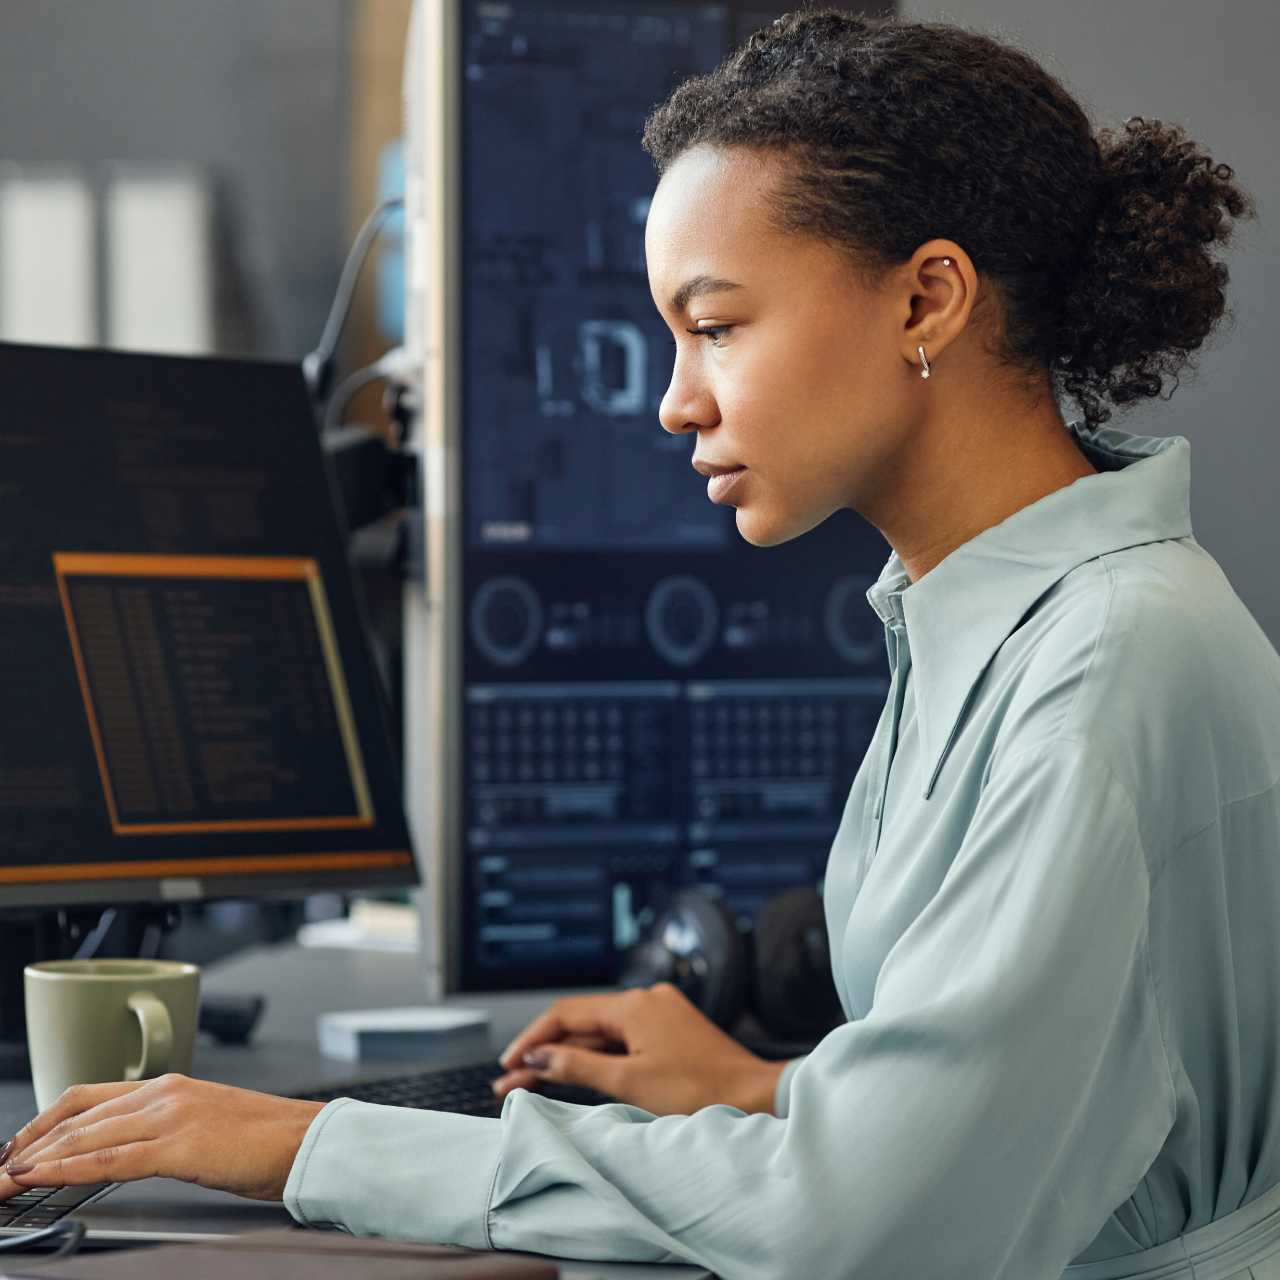 Woman sitting and working at a desktop computer with a coffee mug in front of her.